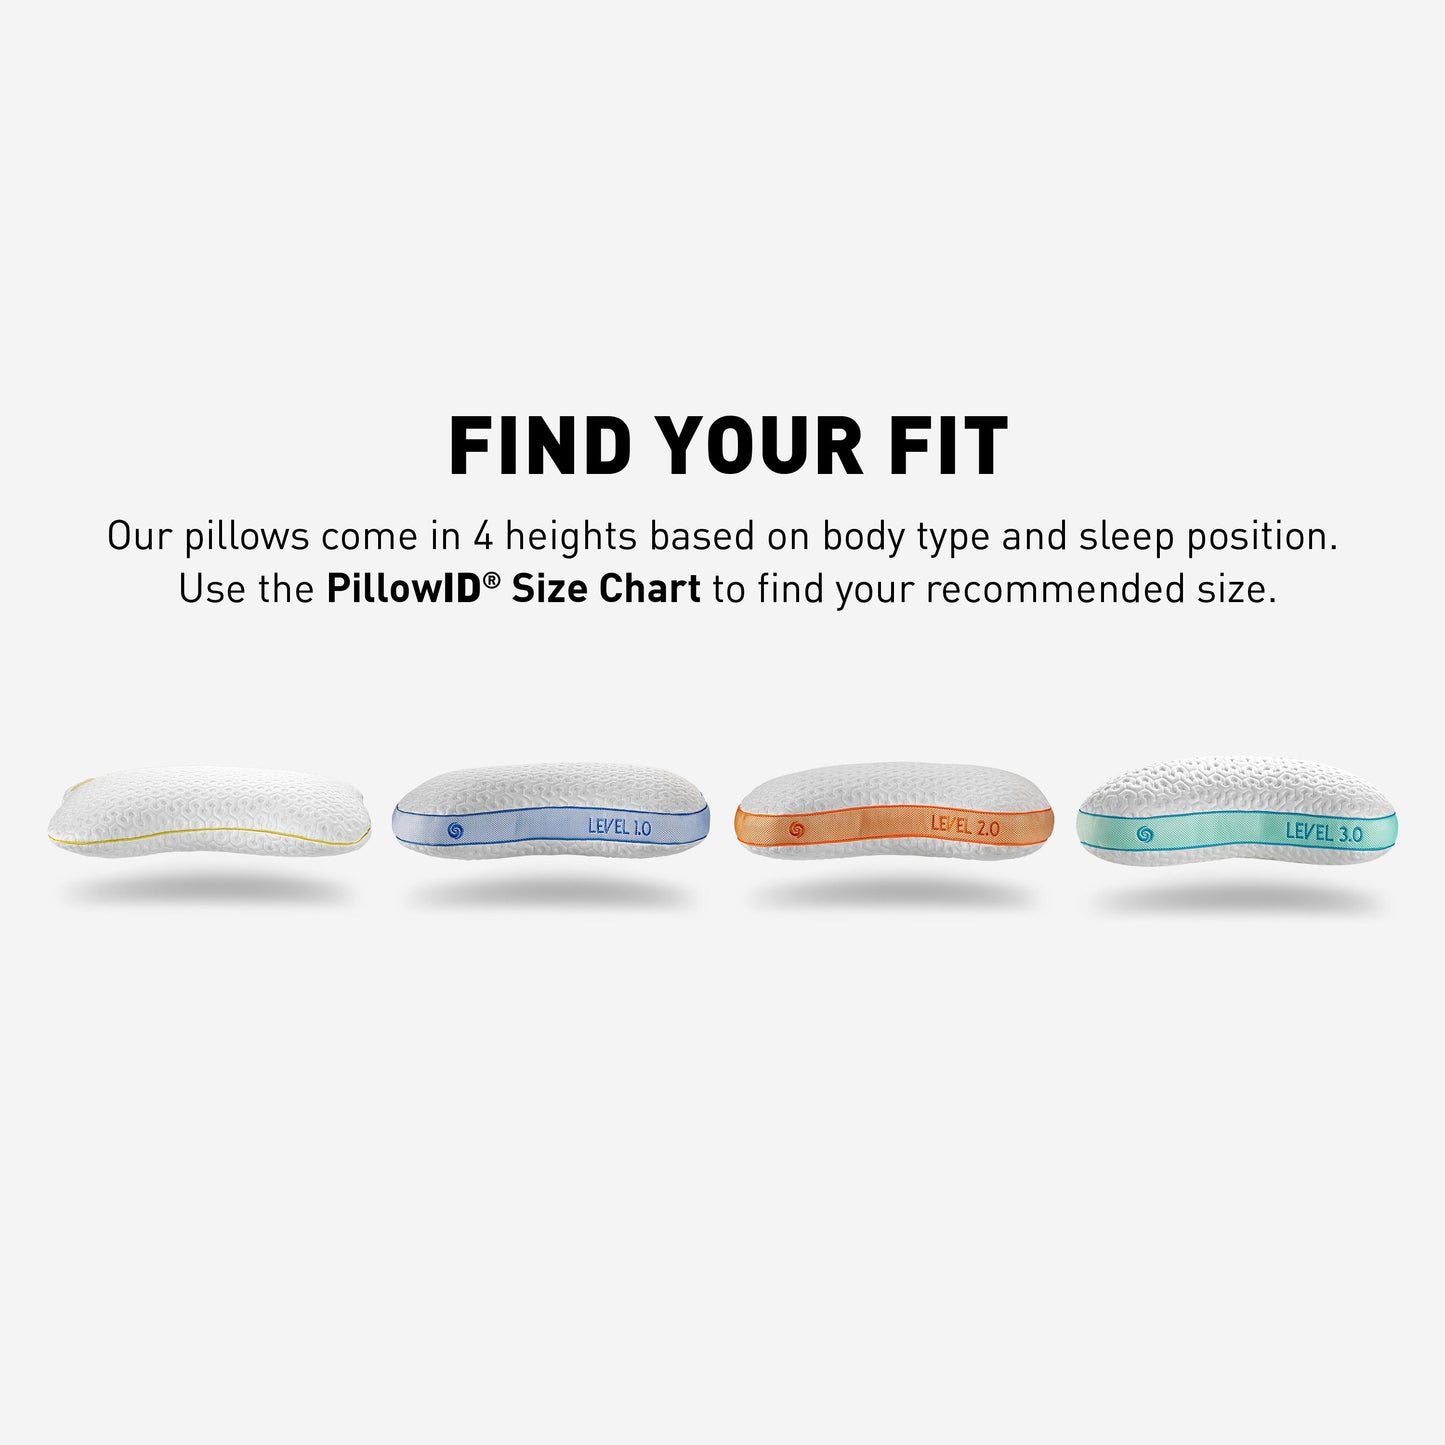 Bedgear Level Performance Pillows, find your fit